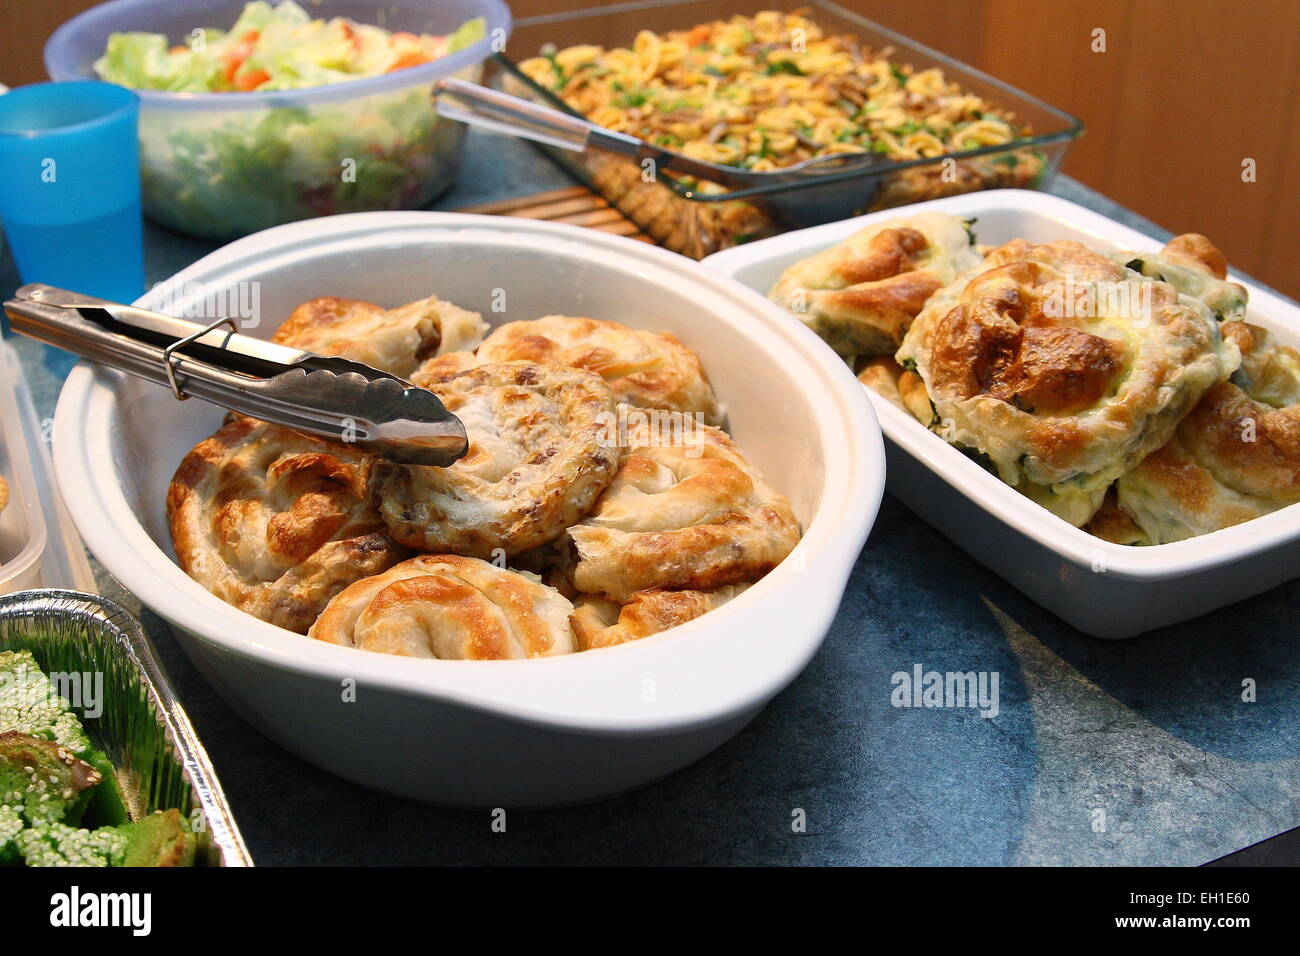 Bosnian dishes on a table Stock Photo